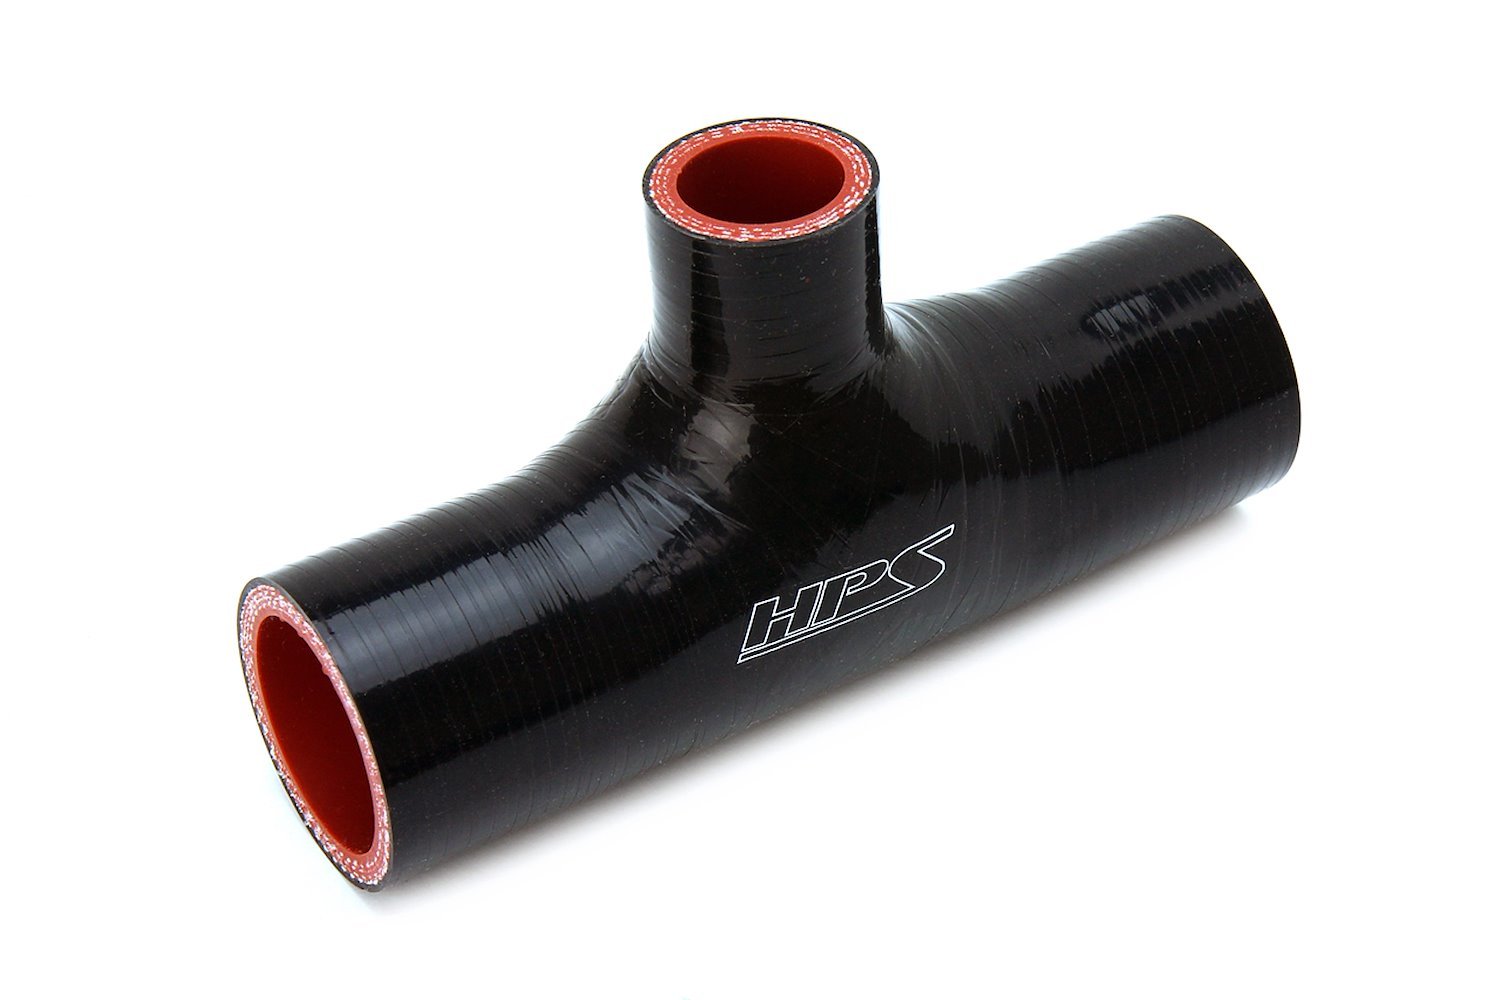 100-THOSE-100-BLK Silicone Tee Hose Adapter, High-Temp 4-Ply Reinforced, 1 in. ID, Black